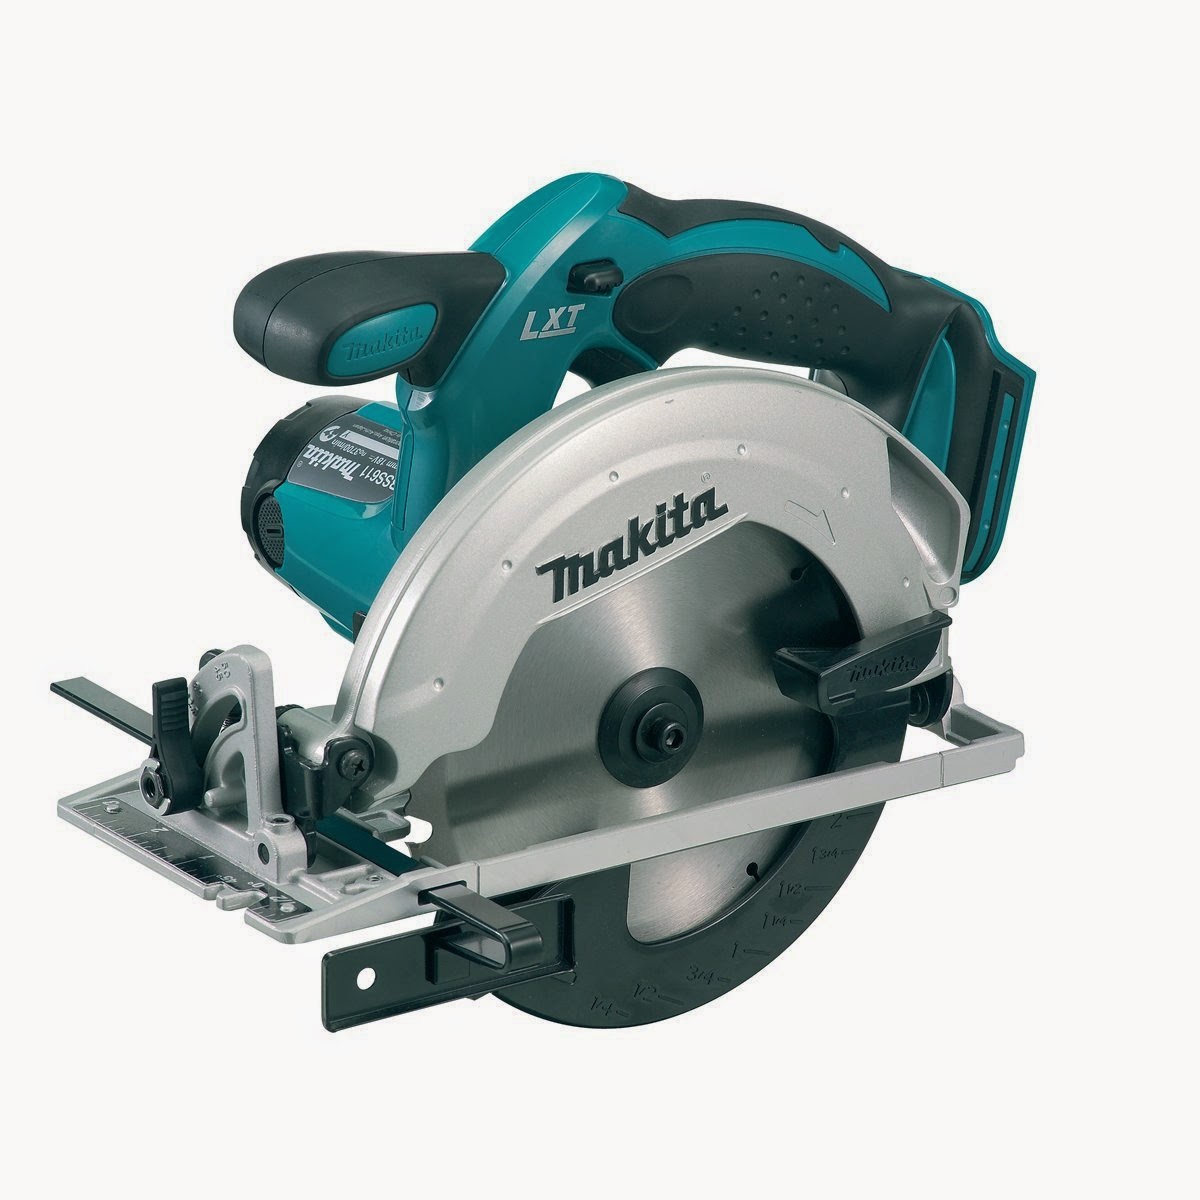 Bare-Tool Makita BSS611Z 18-volt LXT Lithium-ion Cordless 6.5" Circular Saw, review, D35 high-torque motor for maximum cutting power, up to 3700 PRM with 2 1/4" cutting capacity at 90 degrees